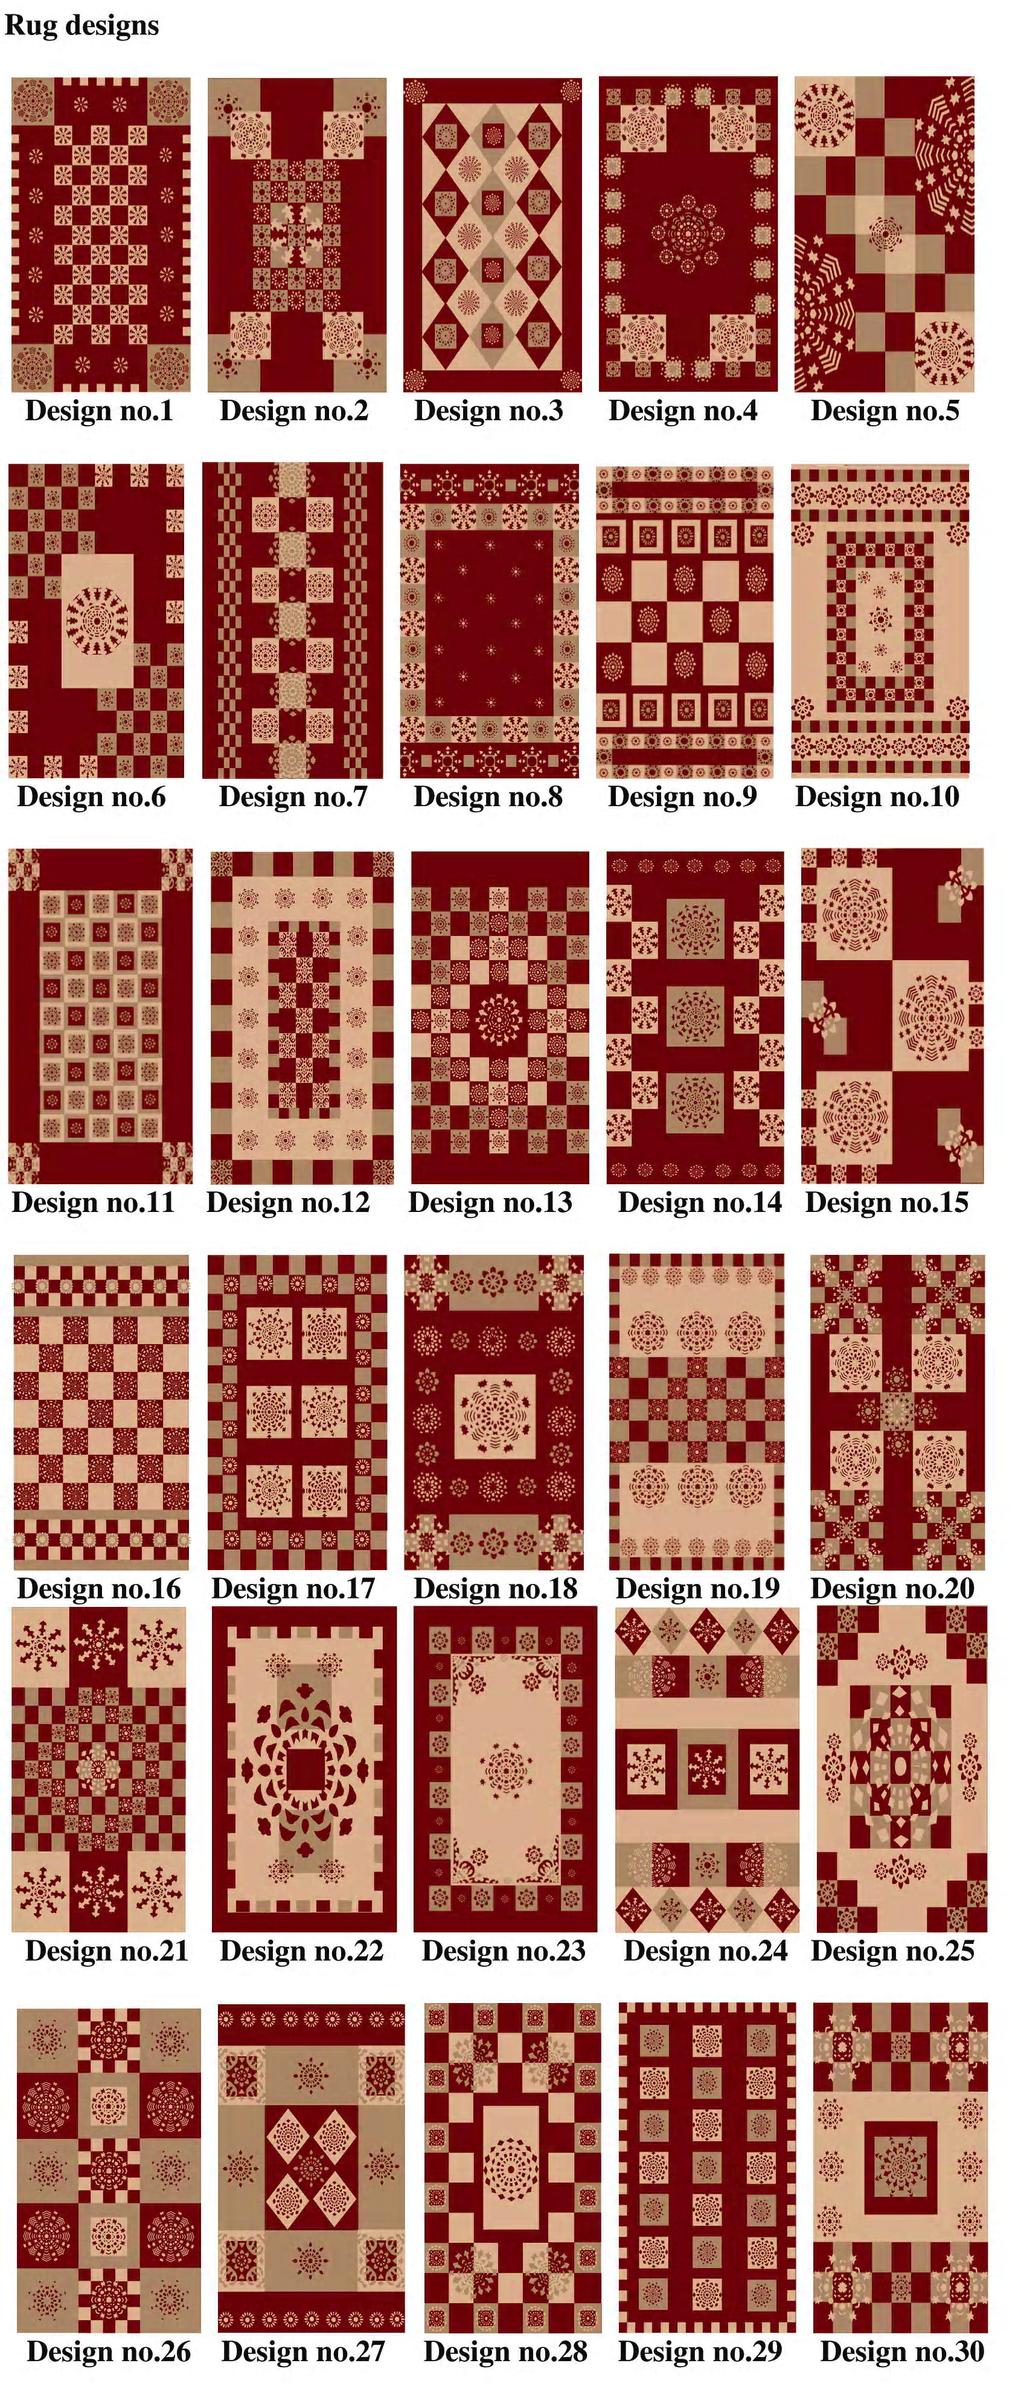 DESIGNING OF RUGS WITH PAPER FOLDING & CUTTING MOTIFS USING SCREEN PRINTING Market acceptability of printed rug: A market survey was conducted to see the market acceptability of the printed rug.